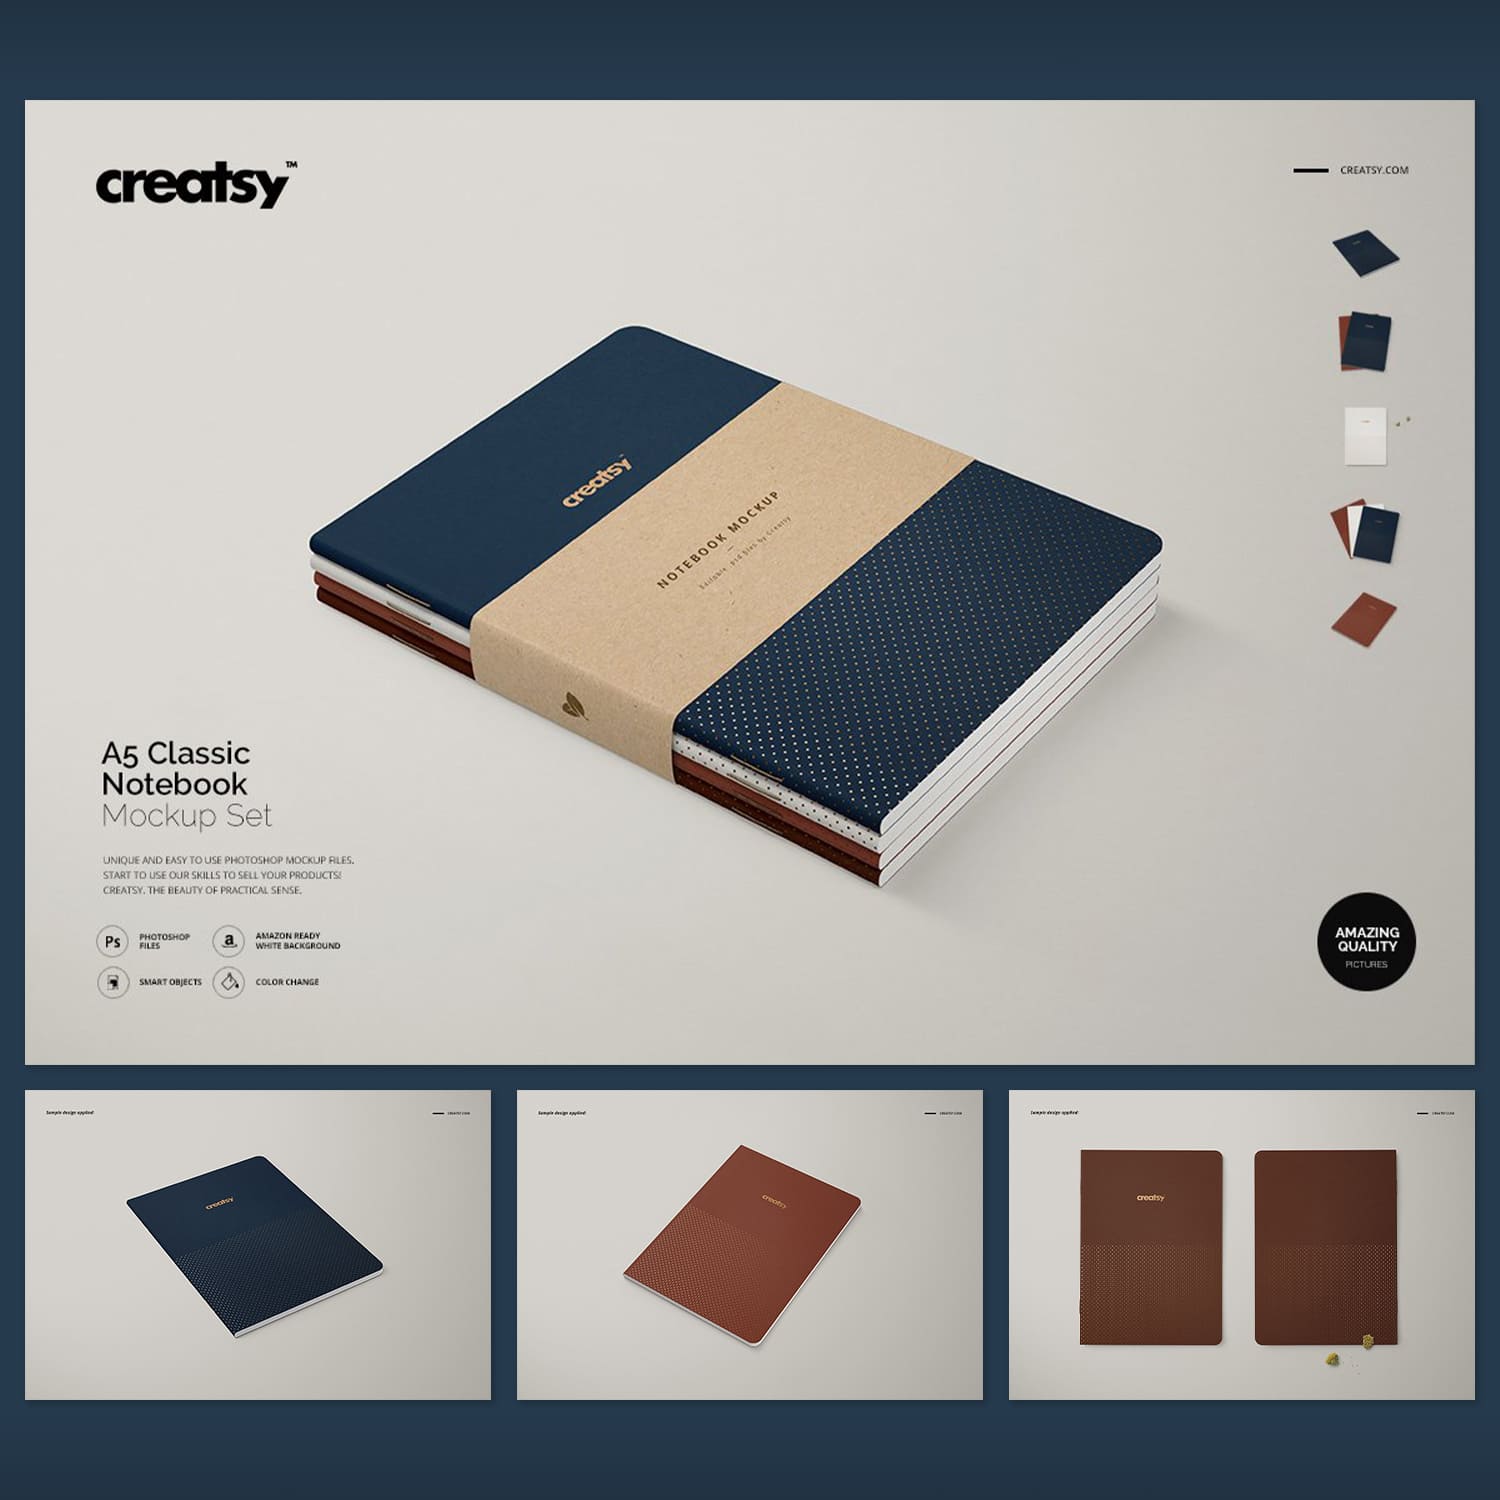 Pack of images of A5 classic notebook with a colorful design.